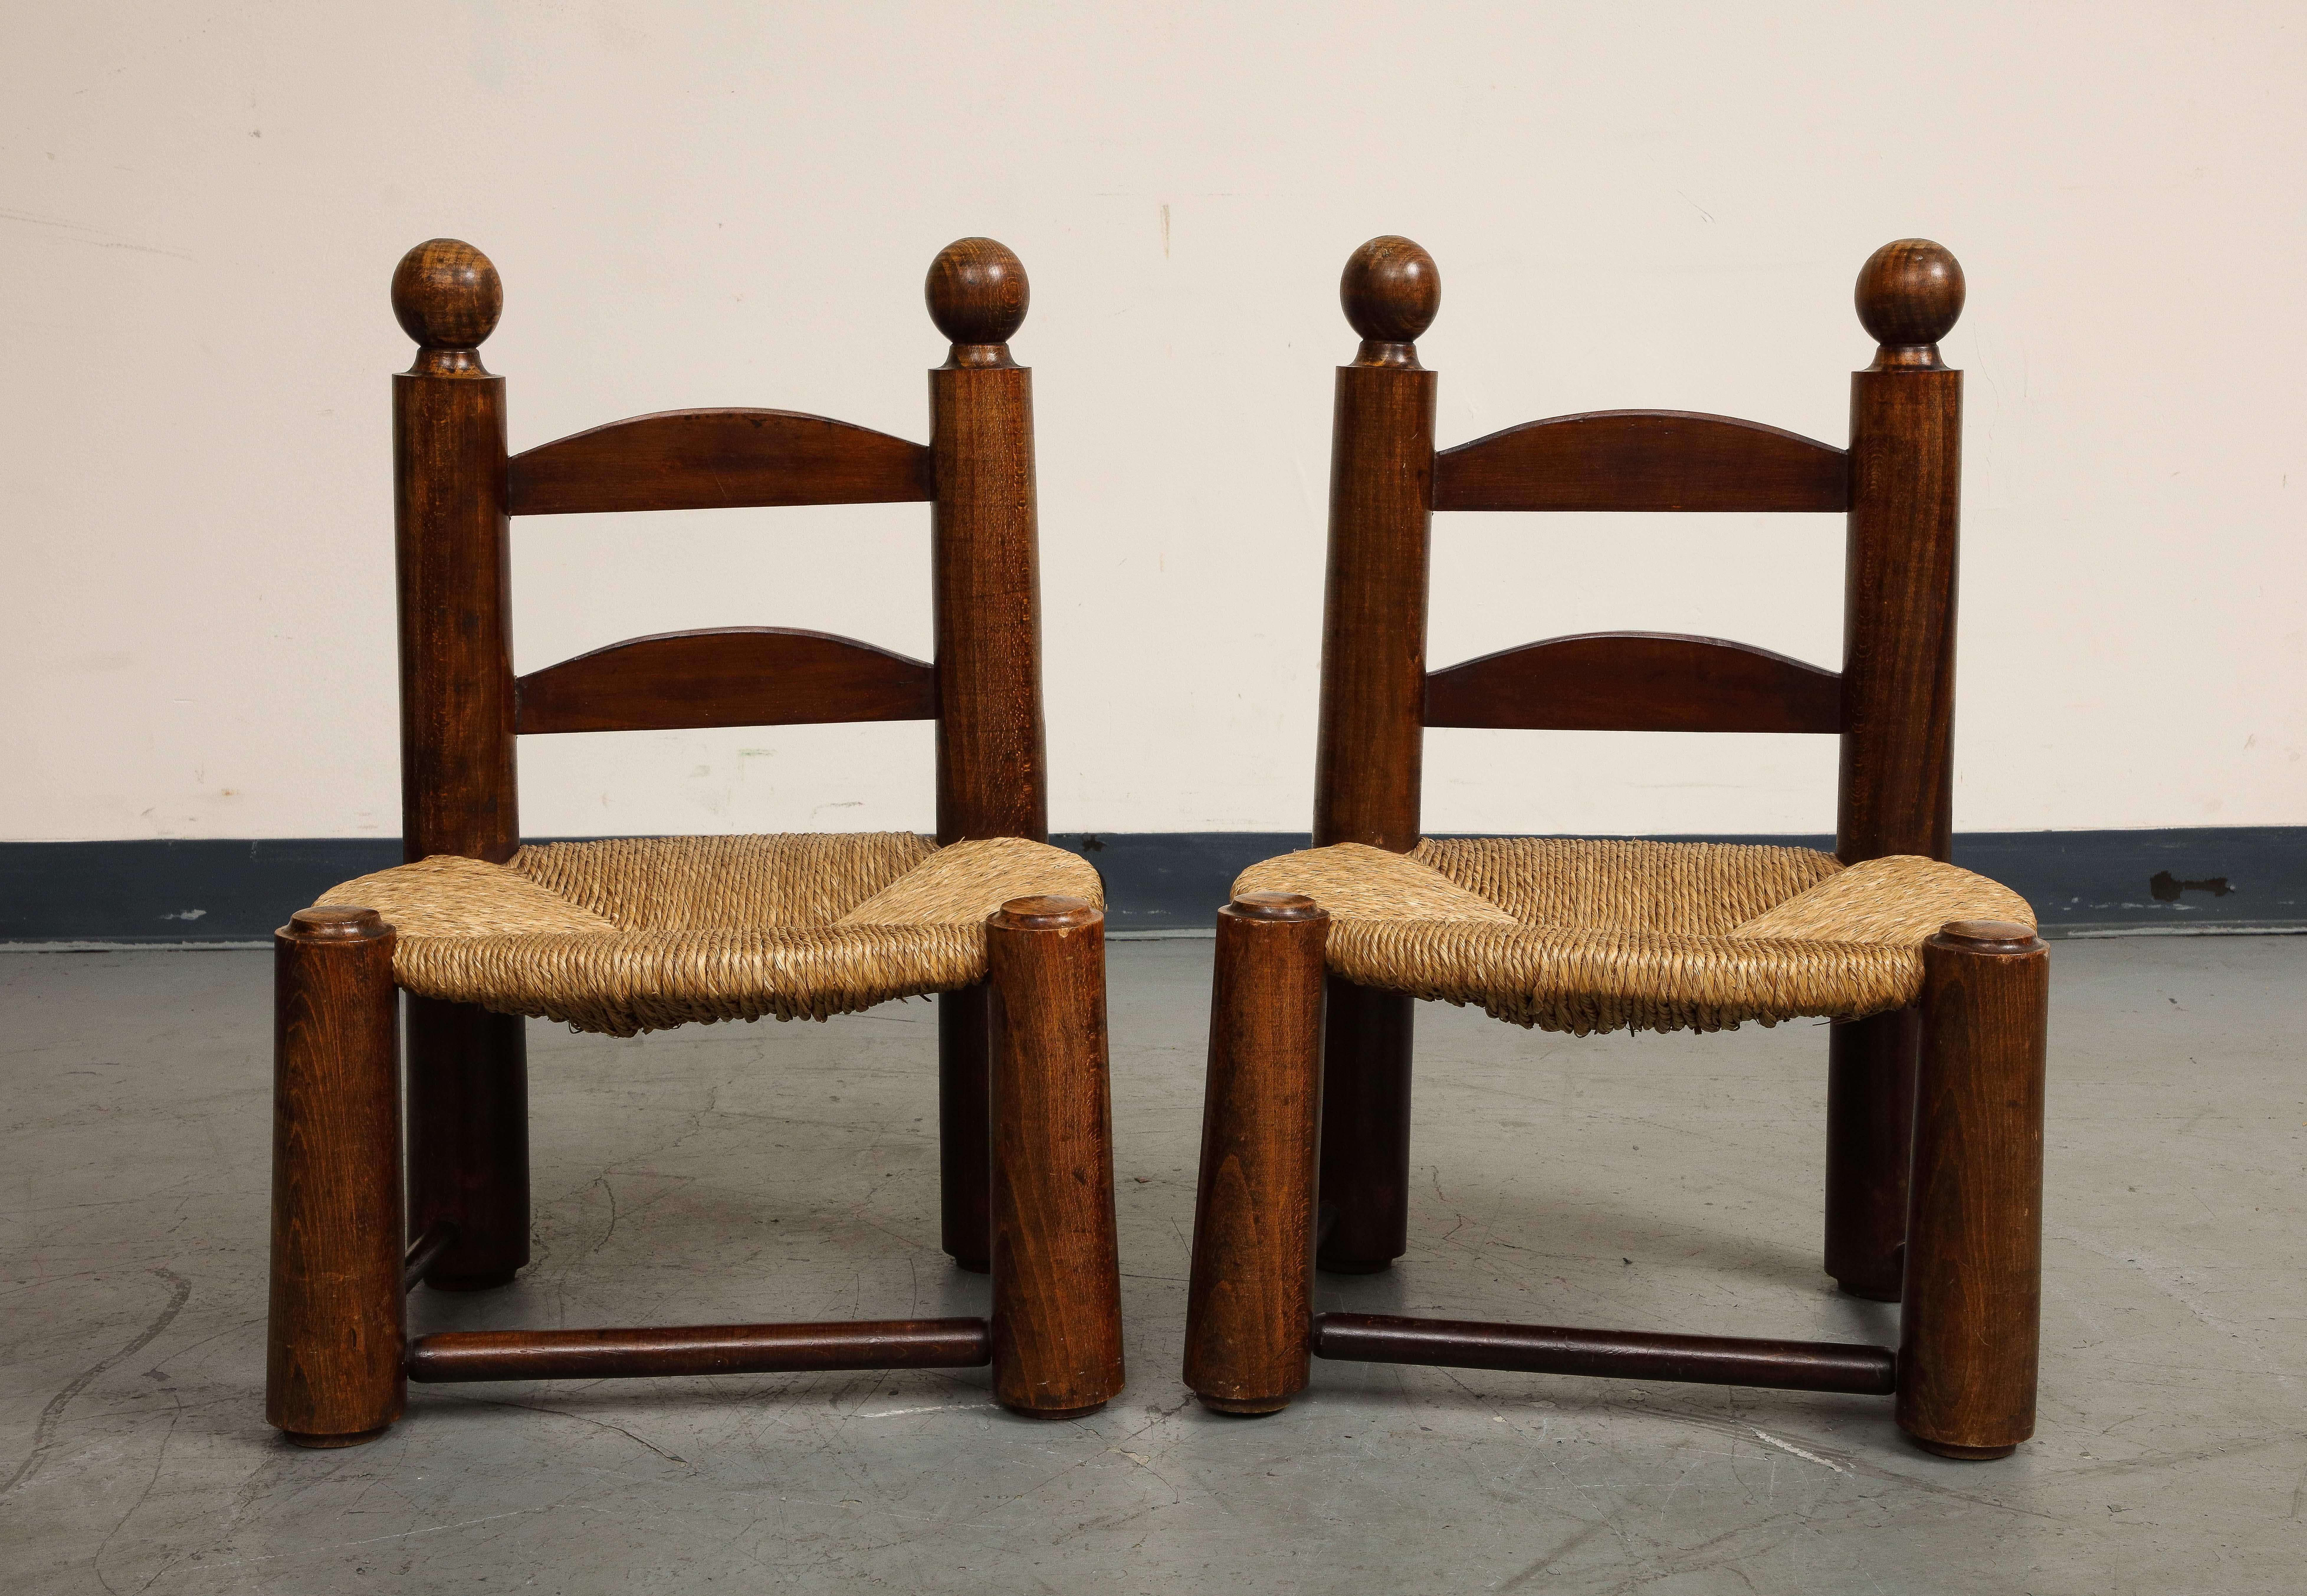 Pair of midcentury French brutalist low children's chairs by Charles Dudouyt, oak frames with rush seats. Chairs have stretchers on three sides for stability.